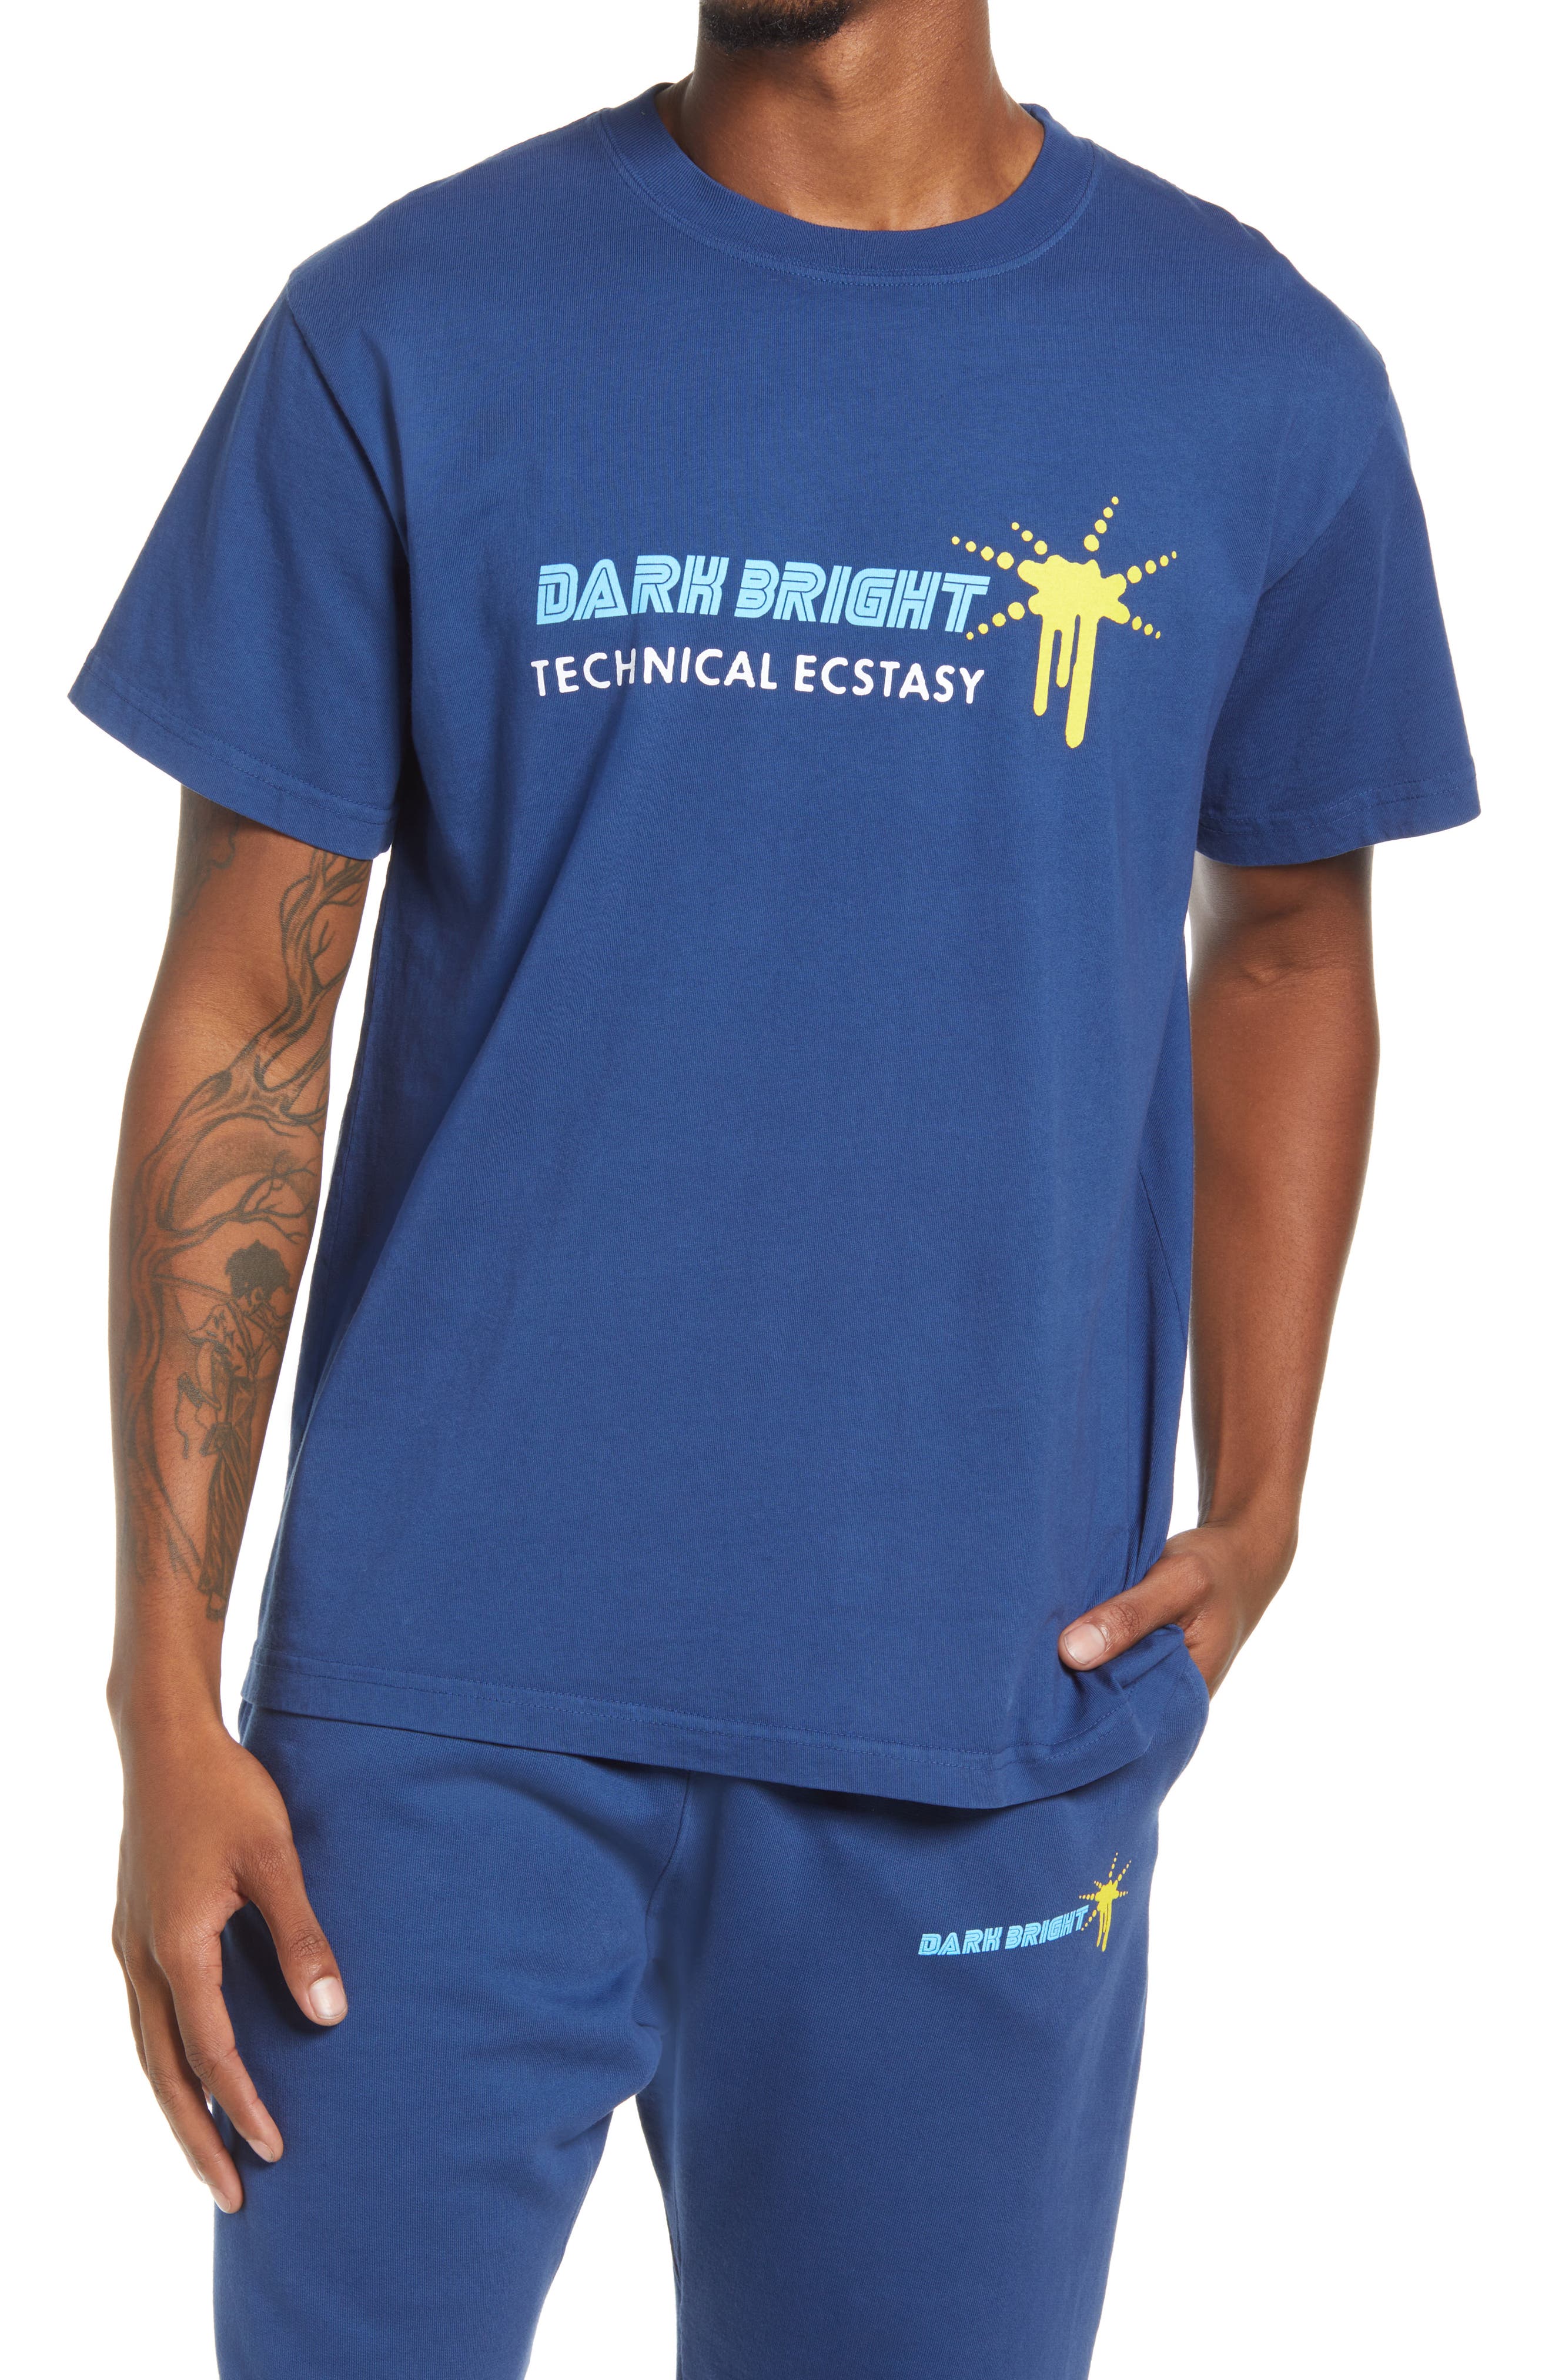 DARKBRIGHT Technical Ecstasy Graphic Tee in Blue